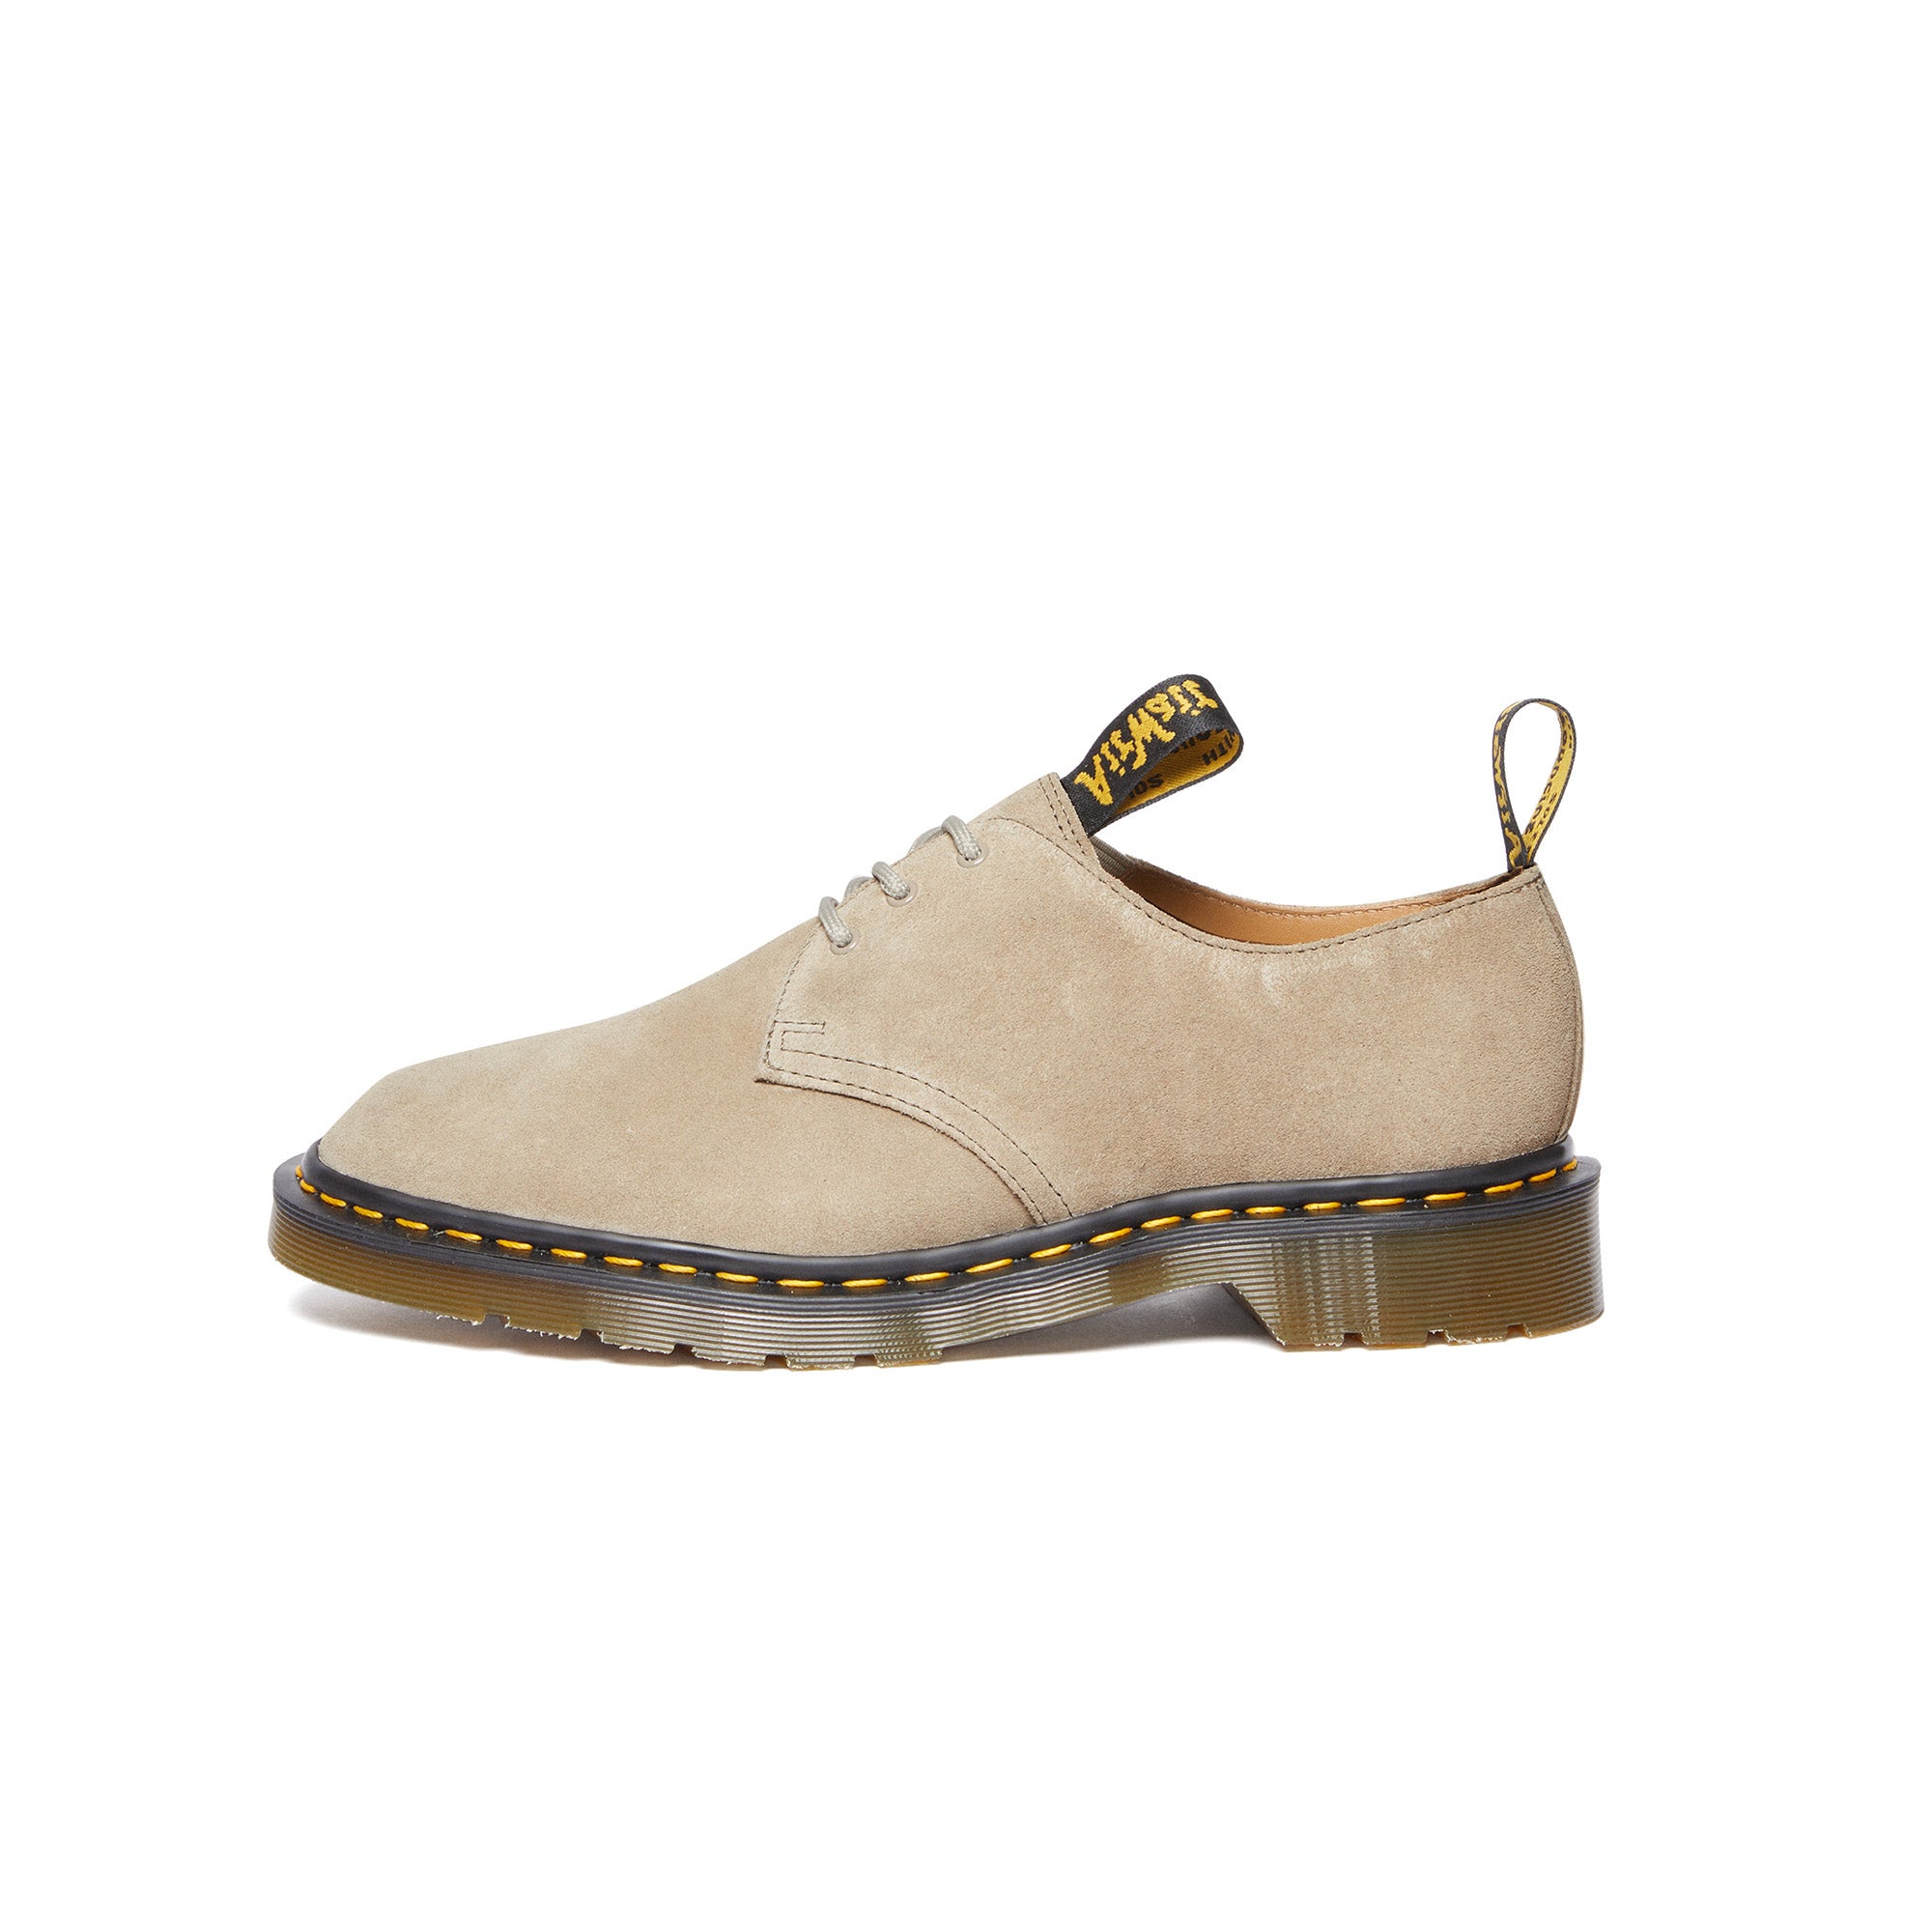 Dr. Martens x Engineered Garments 1461 Hi Suede WP Oxford Shoes - 6